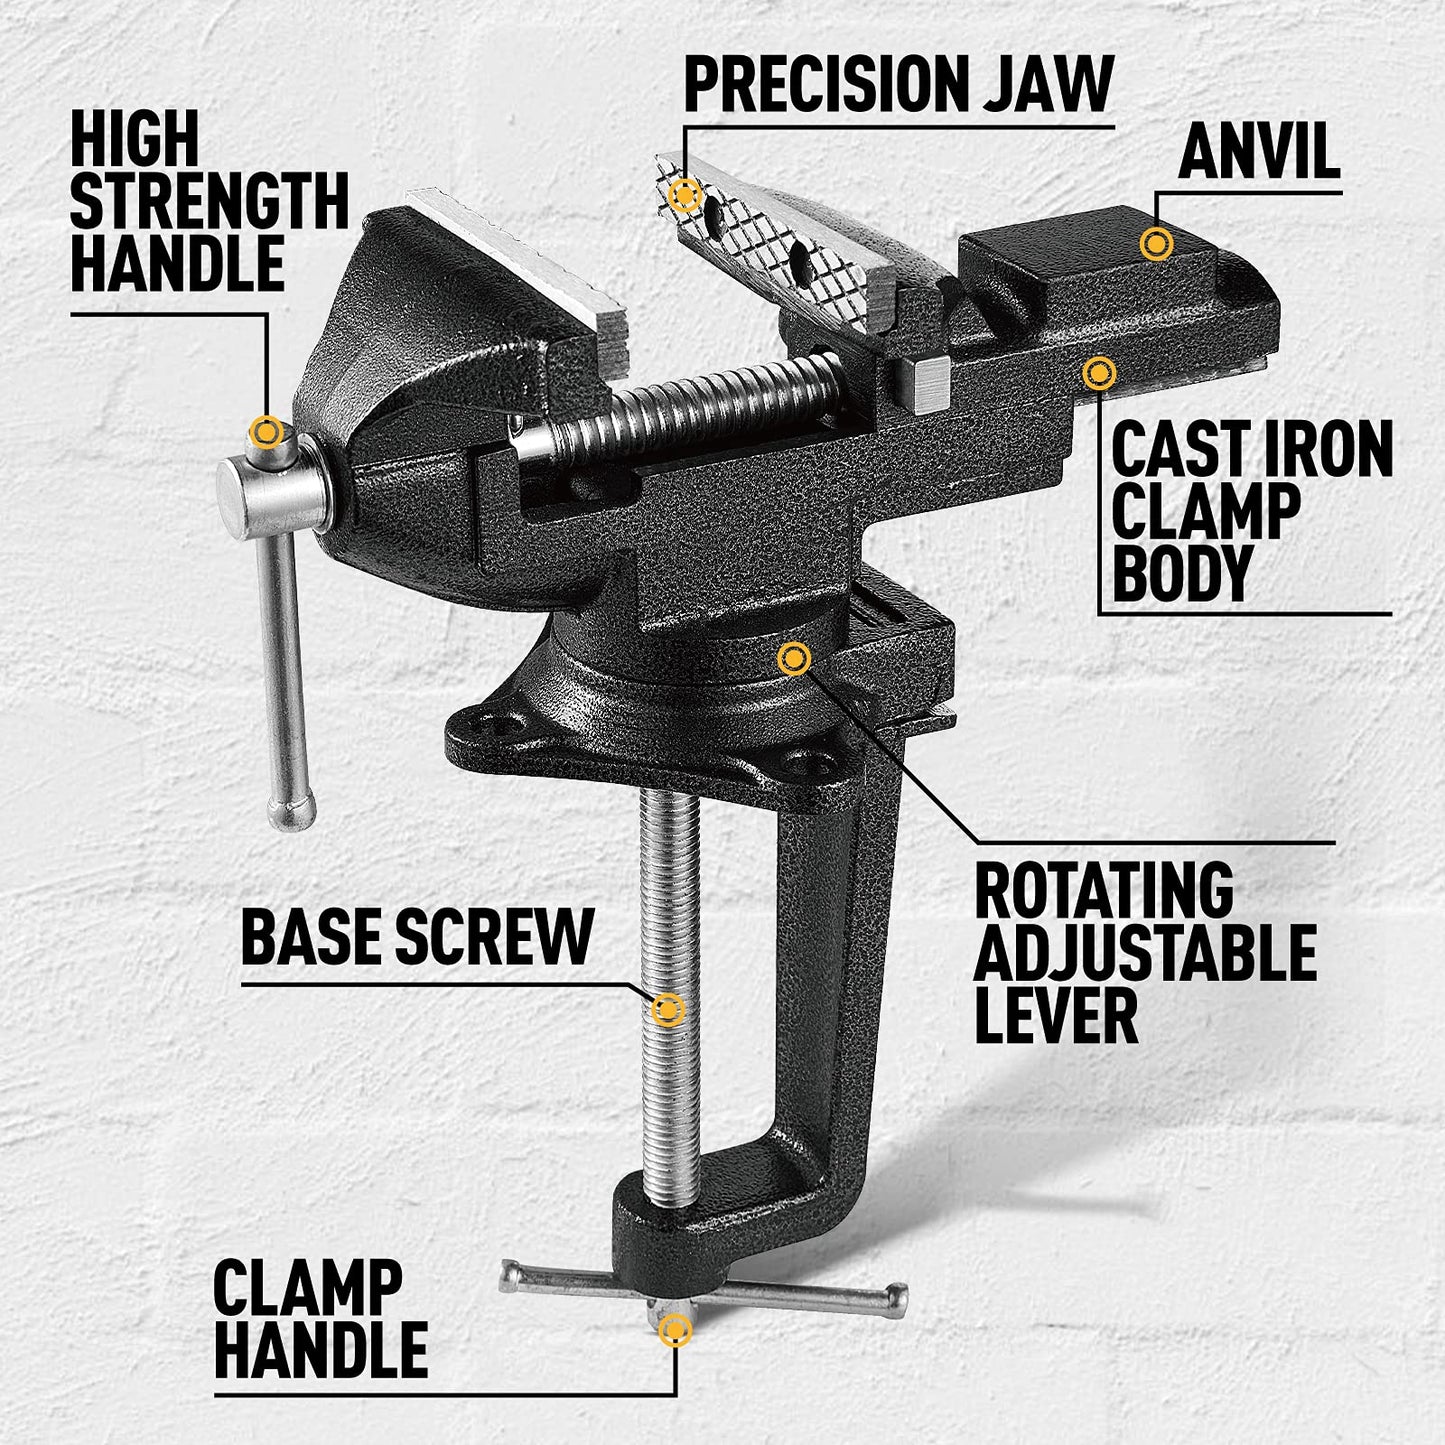 GOEHNER's Dual-Purpose Bench Vise, 3.3" Universal Home Vise With 360° Swivel Vice Base And Heavy duty Clamp-On Table Vise with Quick Adjustment for